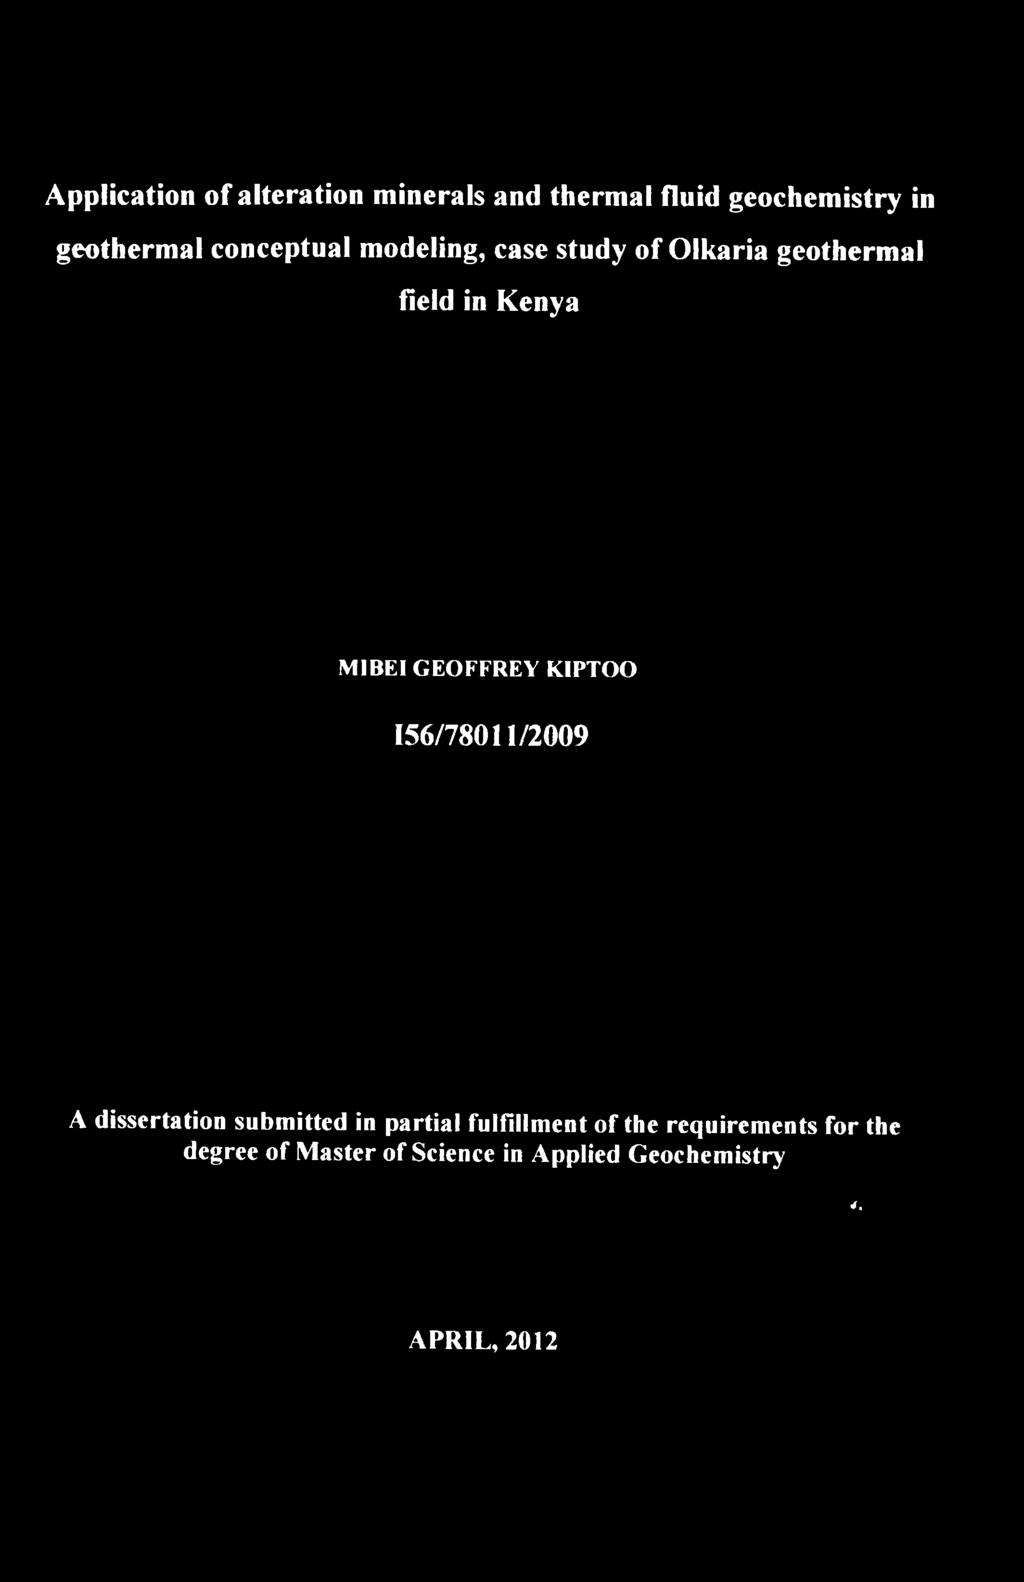 GEOFFREY KIPTOO 156/78011/2009 A dissertation submitted in partial fulfillment of